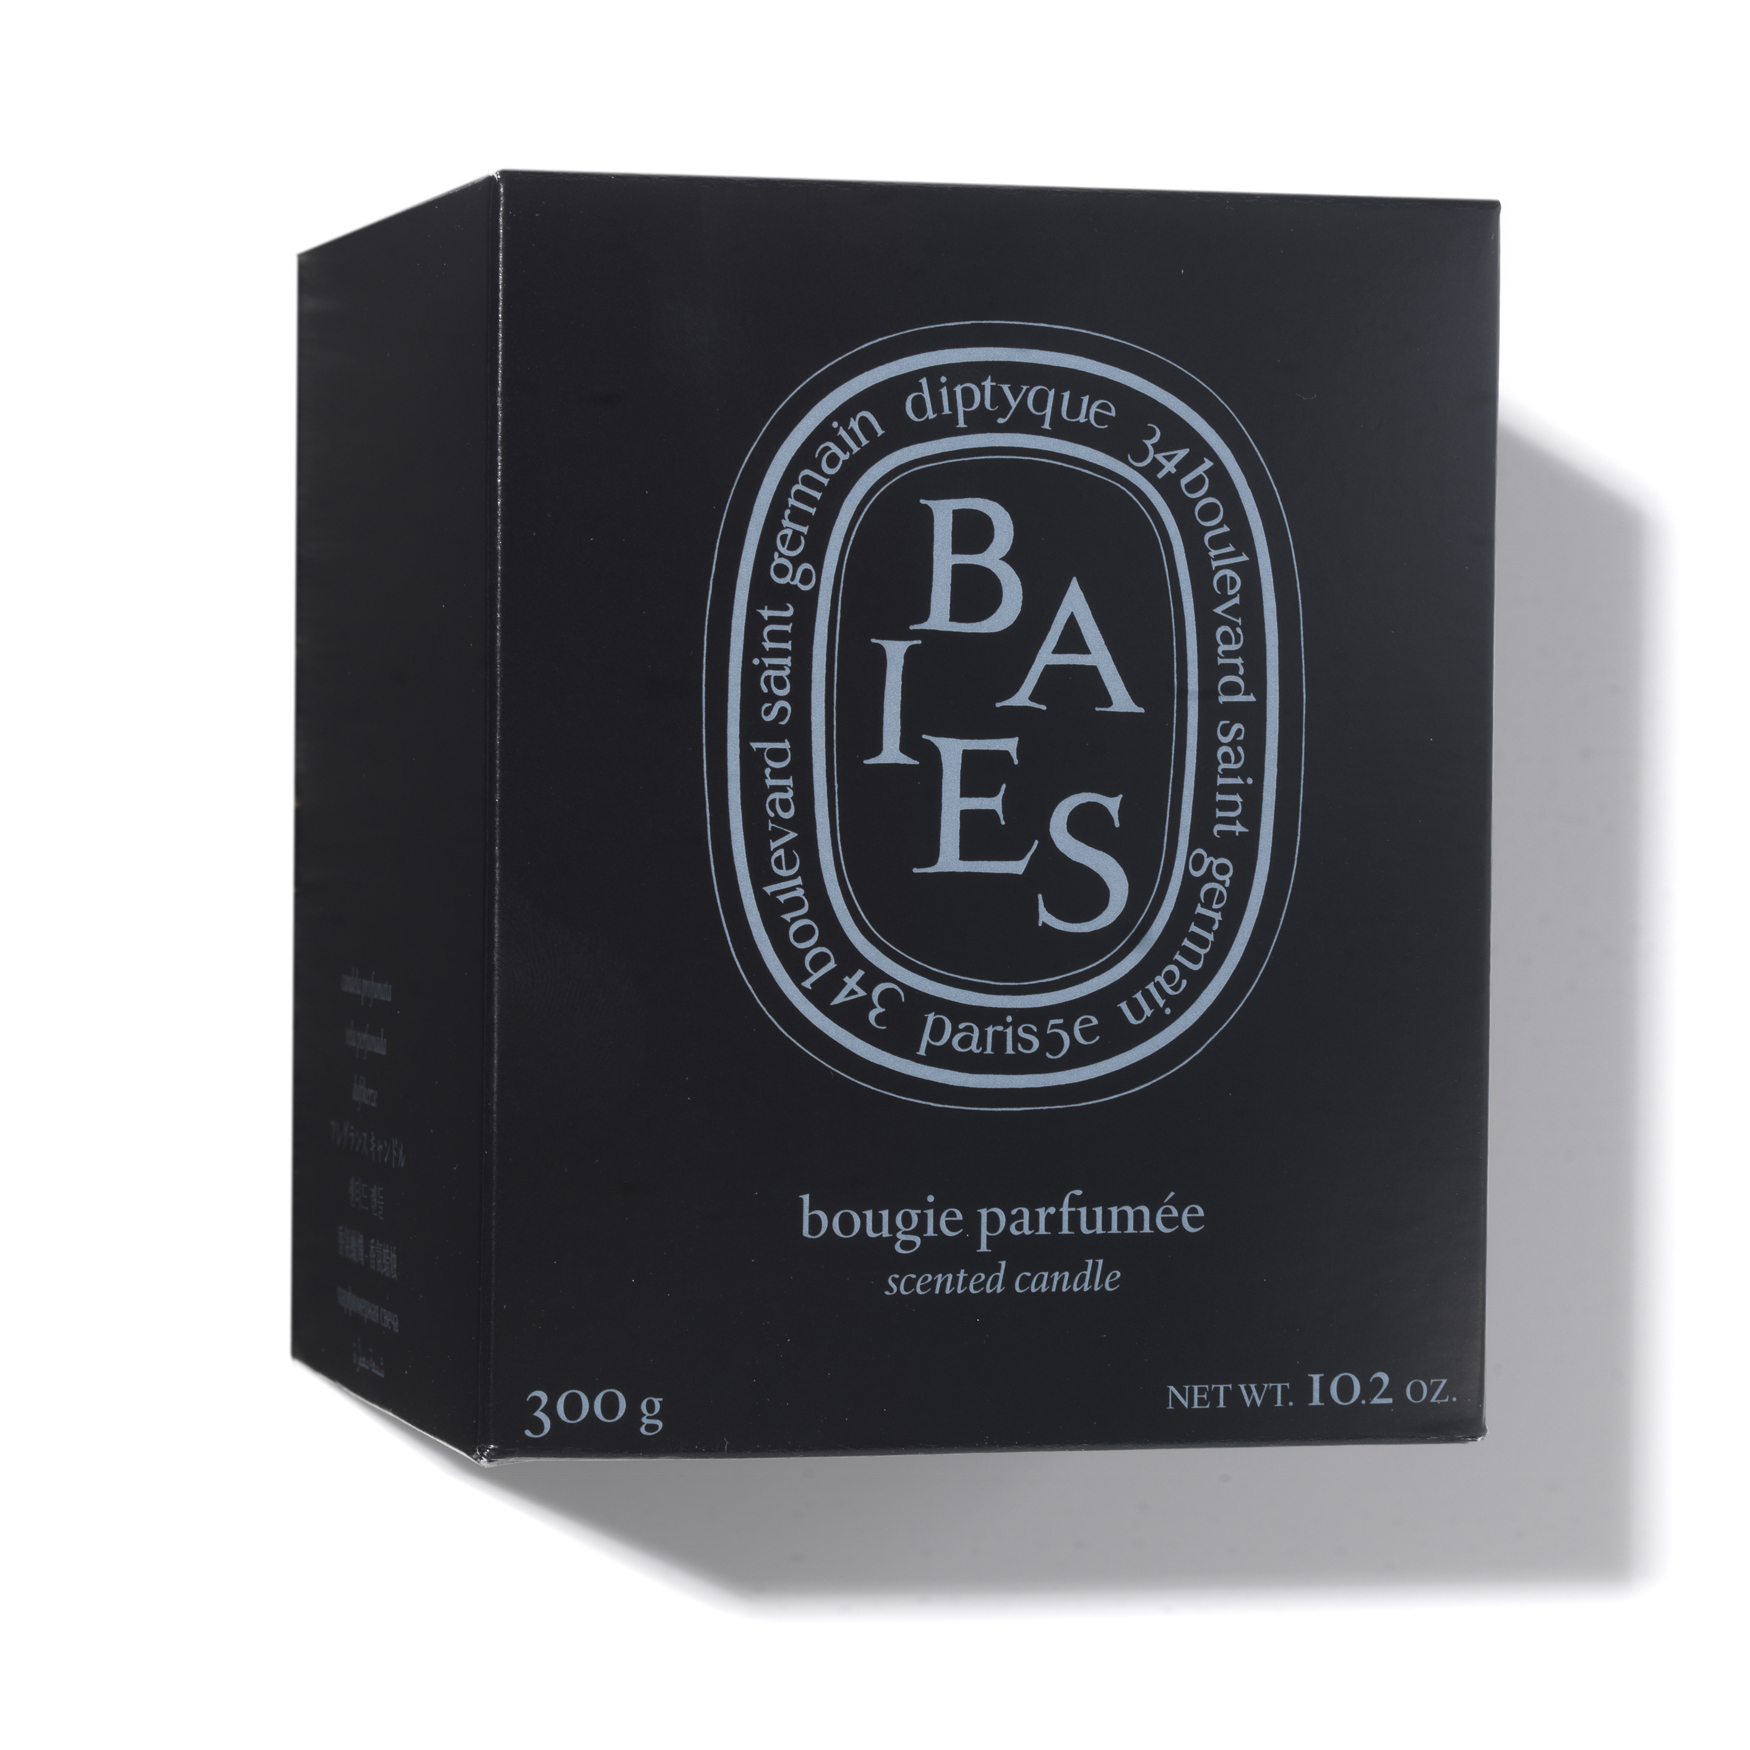 Diptyque Baies Colored Candle | Space NK